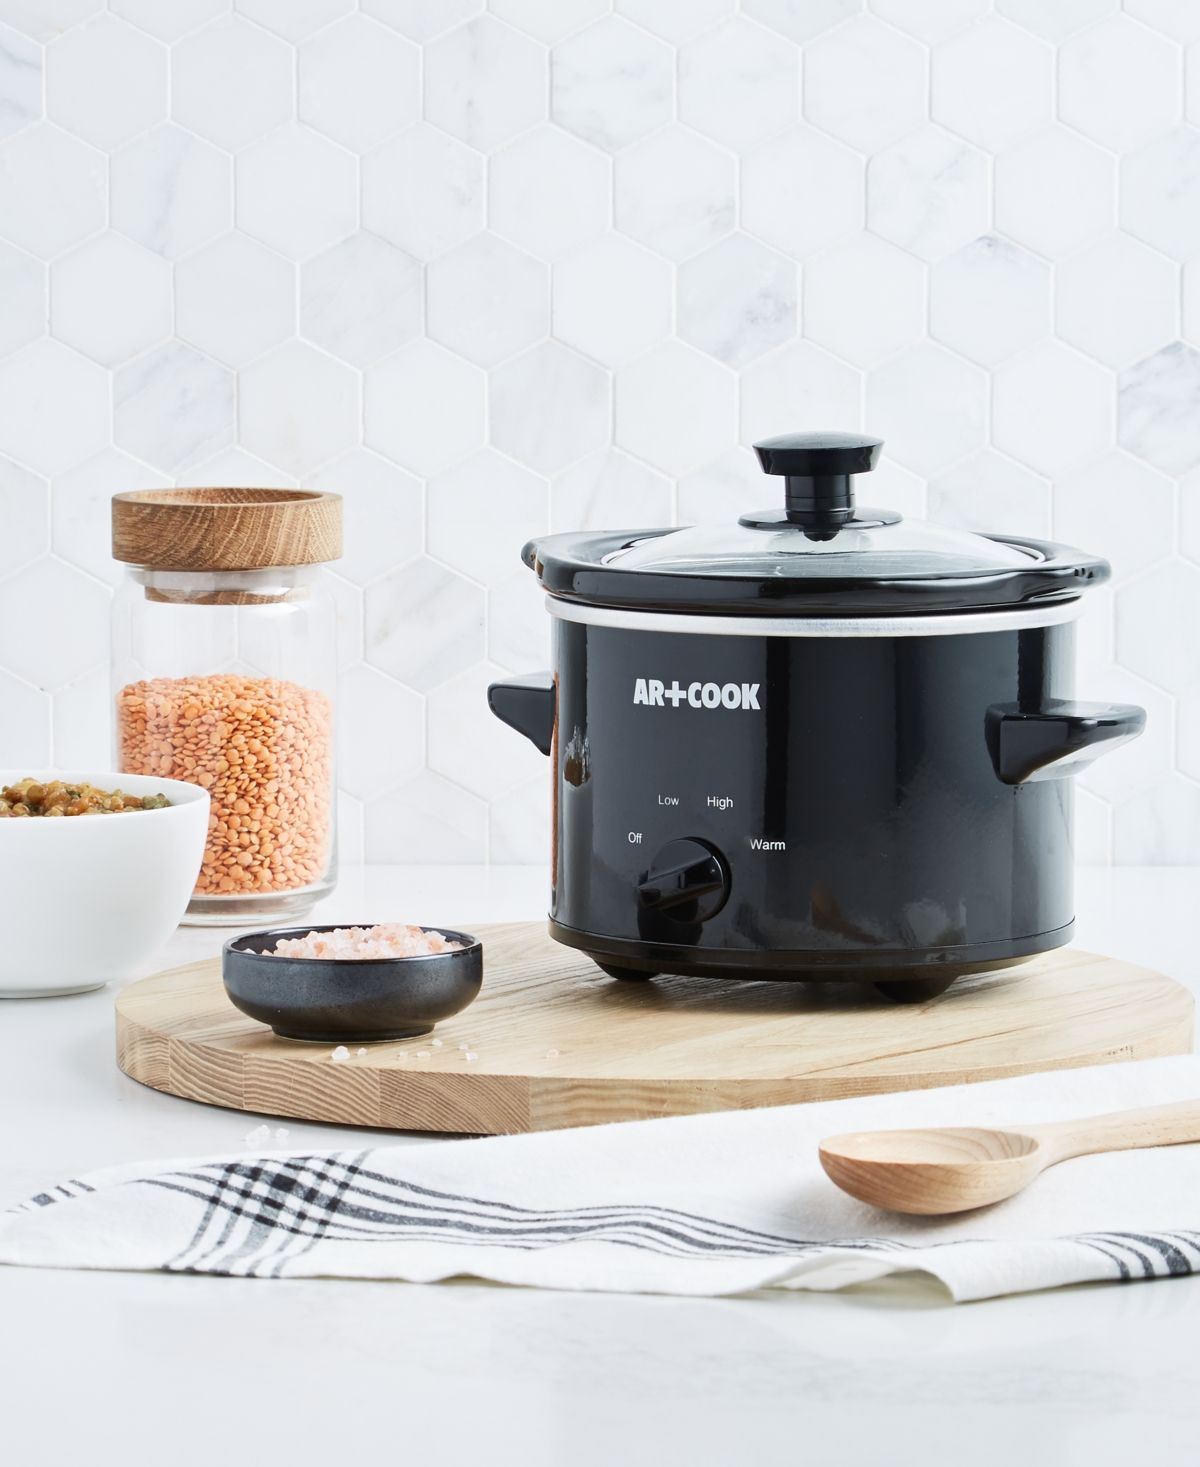 Slow Cooker HOT Black Friday Deal! Only $8.99! (Was $22)